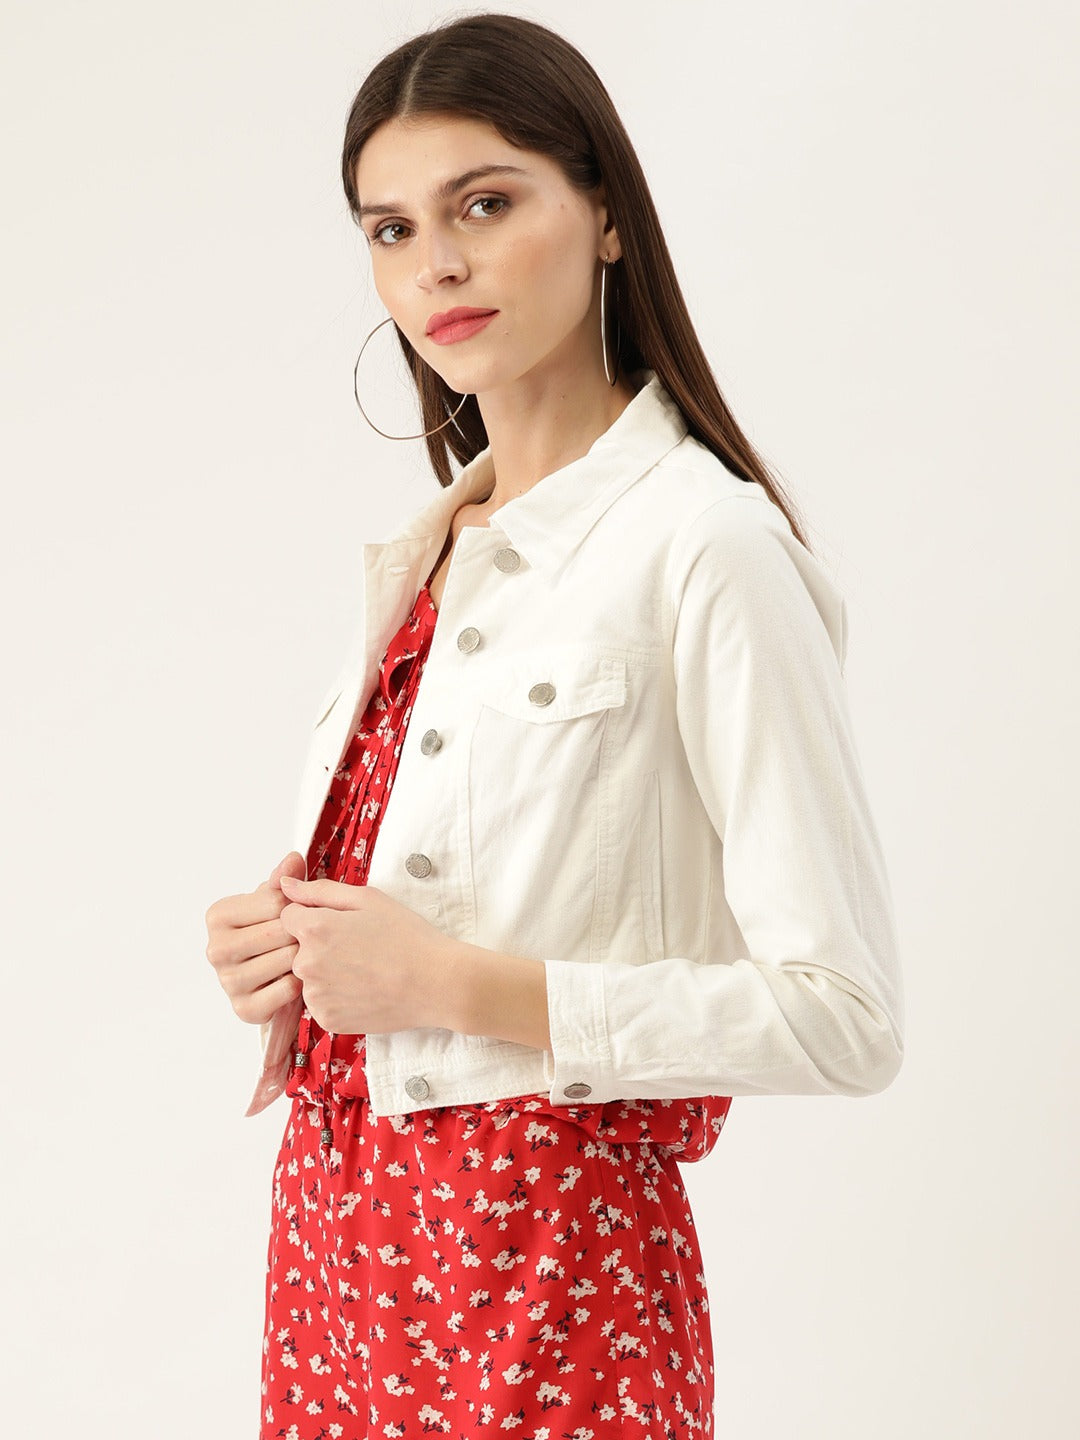 White solid crop jacket for women, featuring a fashionable and stylish denim design. The jacket is paired with a vibrant red floral patterned dress, creating a chic and trendy look.